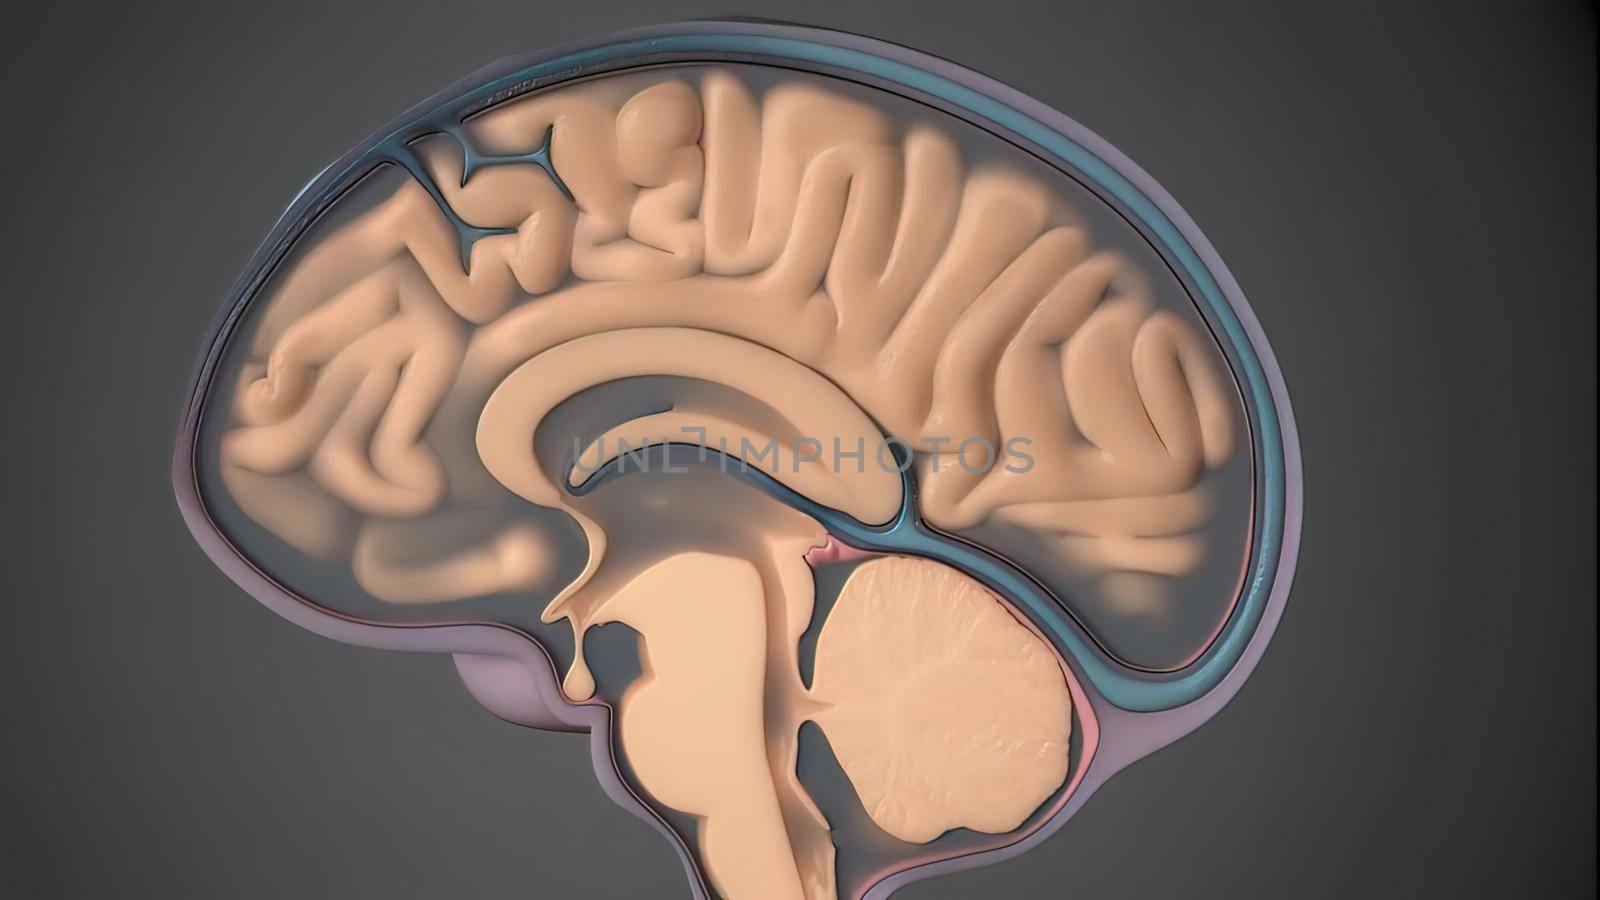 The brain and the spinal cord make up the central nervous system, which alongside the peripheral nervous system is responsible for regulating all bodily functions. 3D illustration